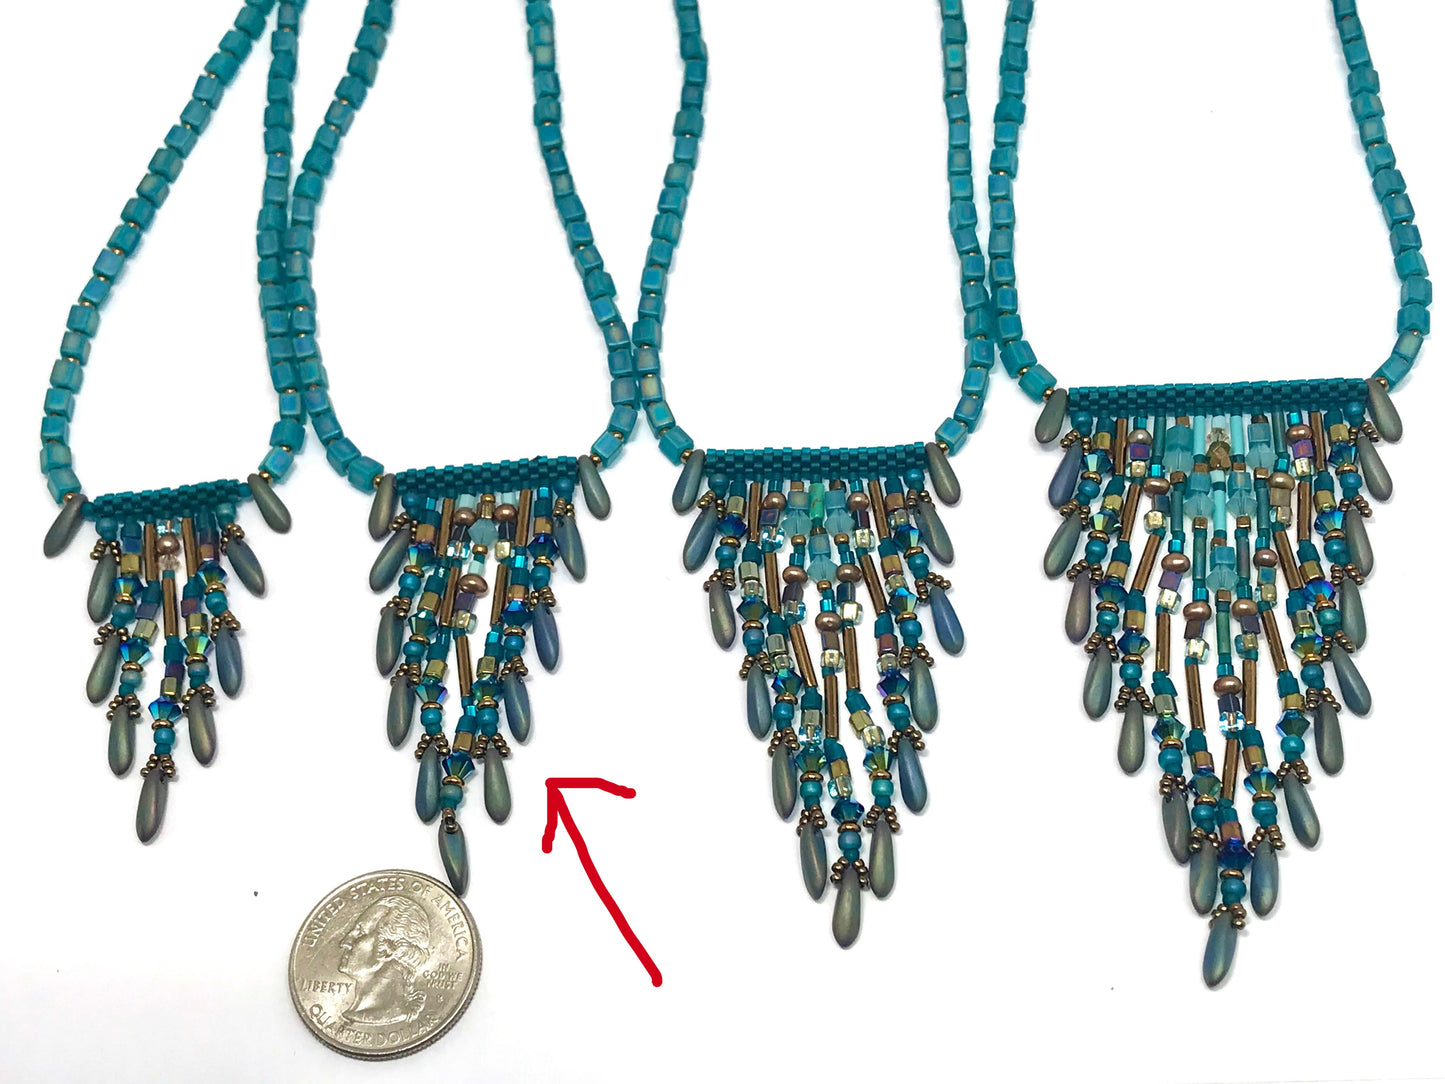 Fringy Teal Necklace 9 strands